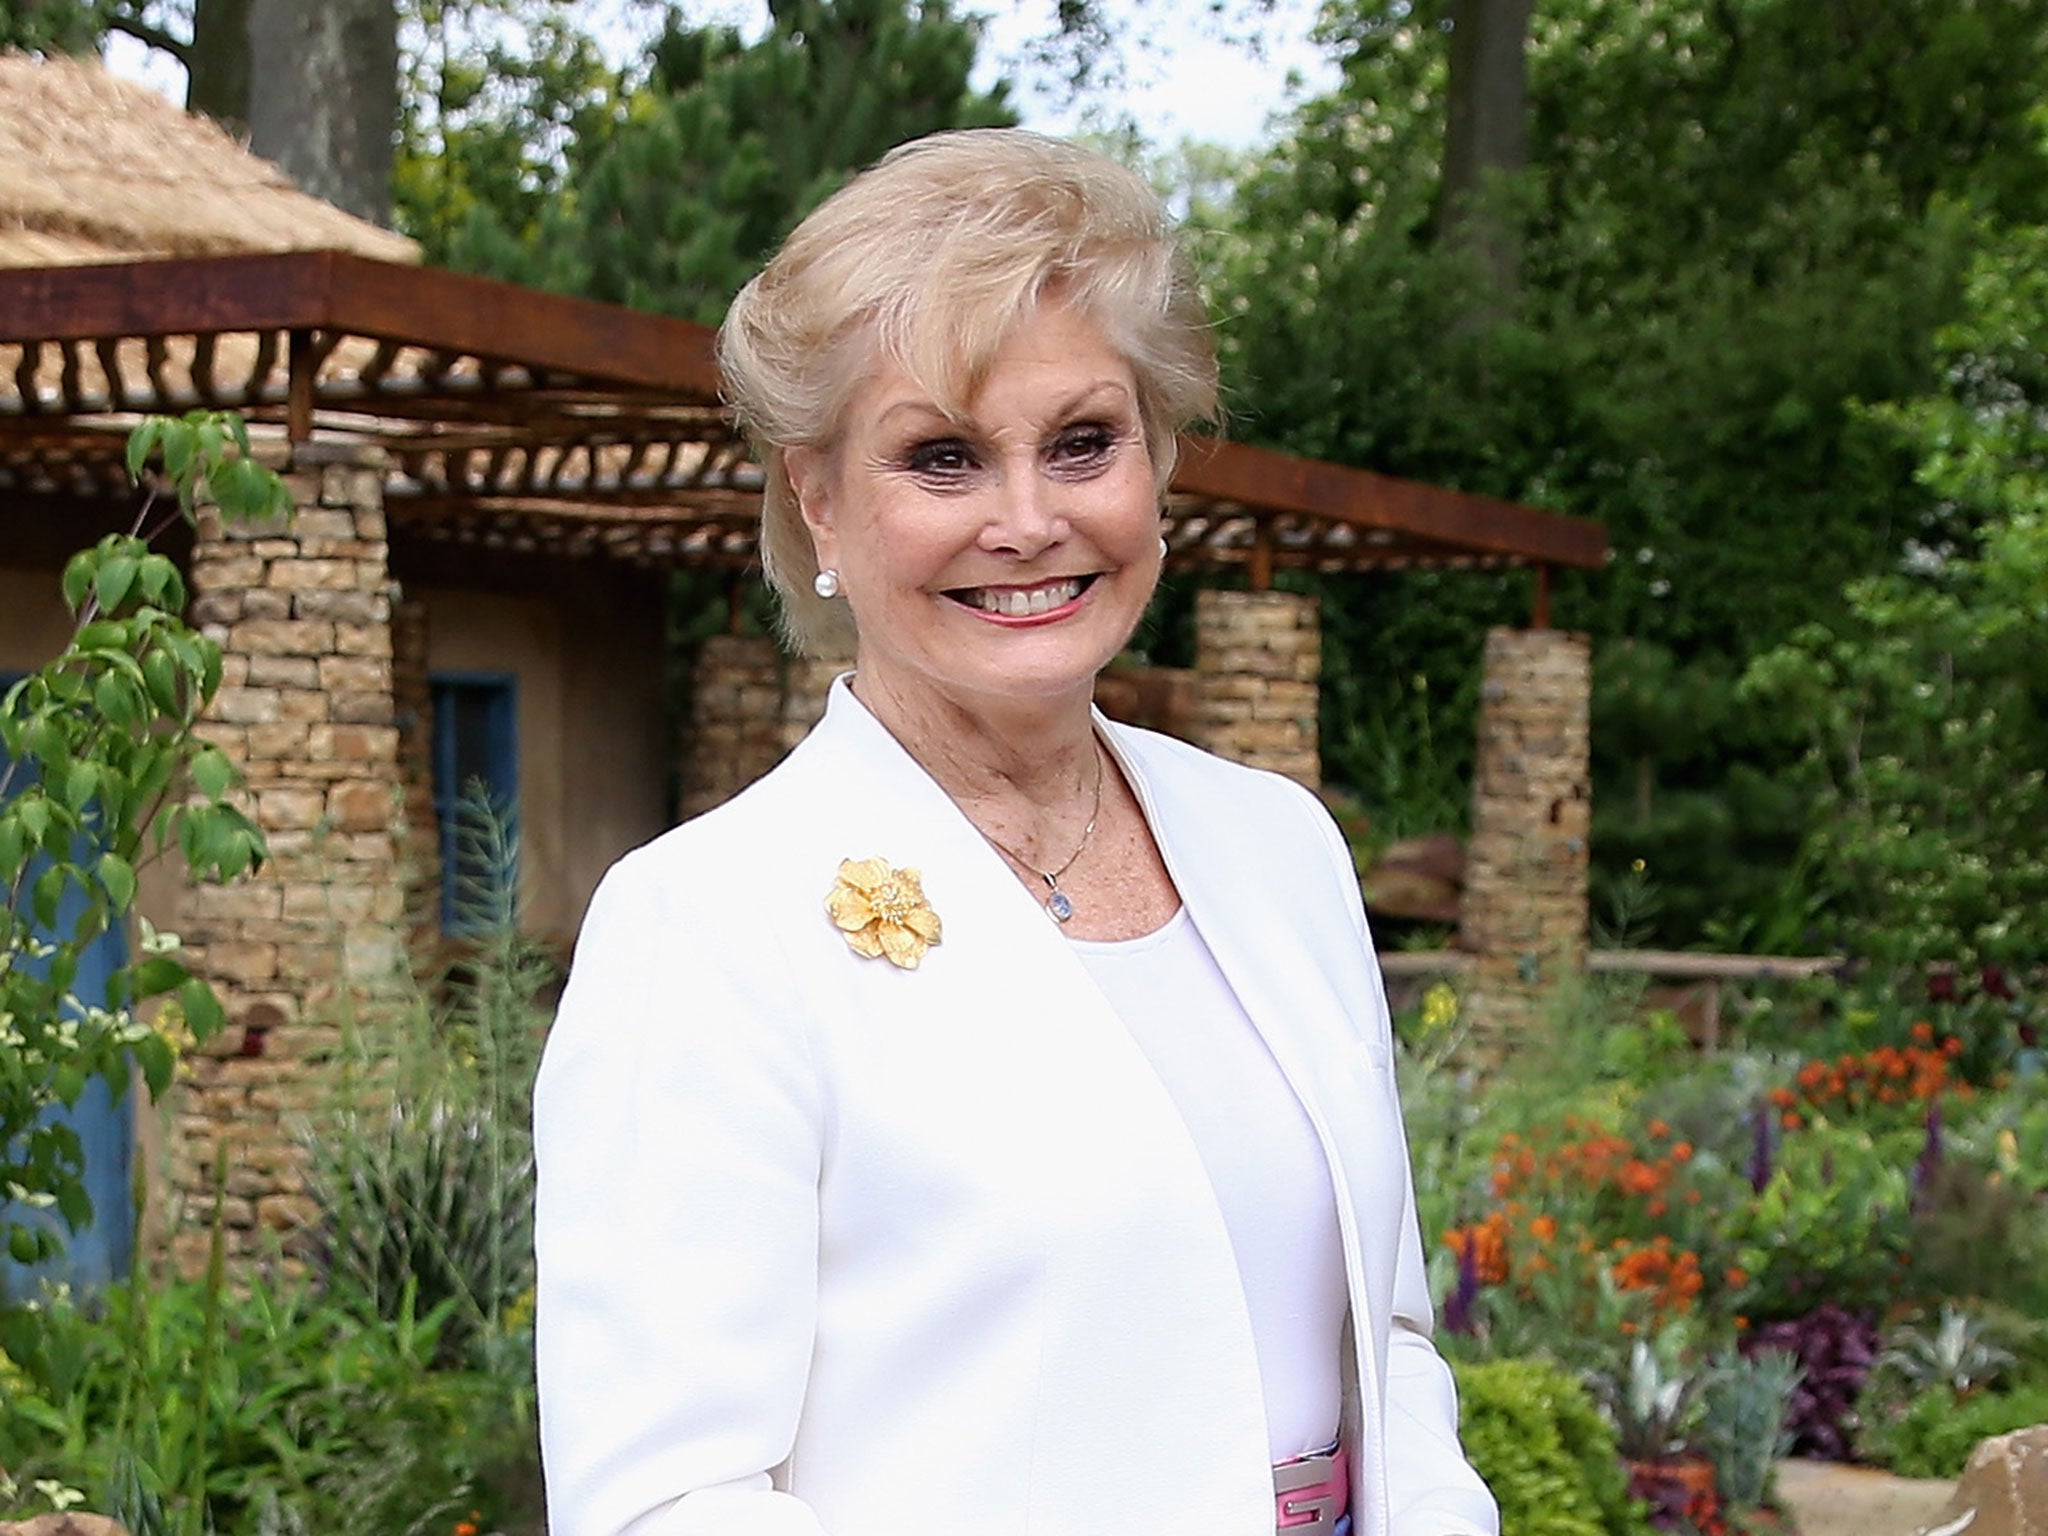 Angela Rippon presented the first two seasons of Top Gear will not be joining Chris Evans on the new series